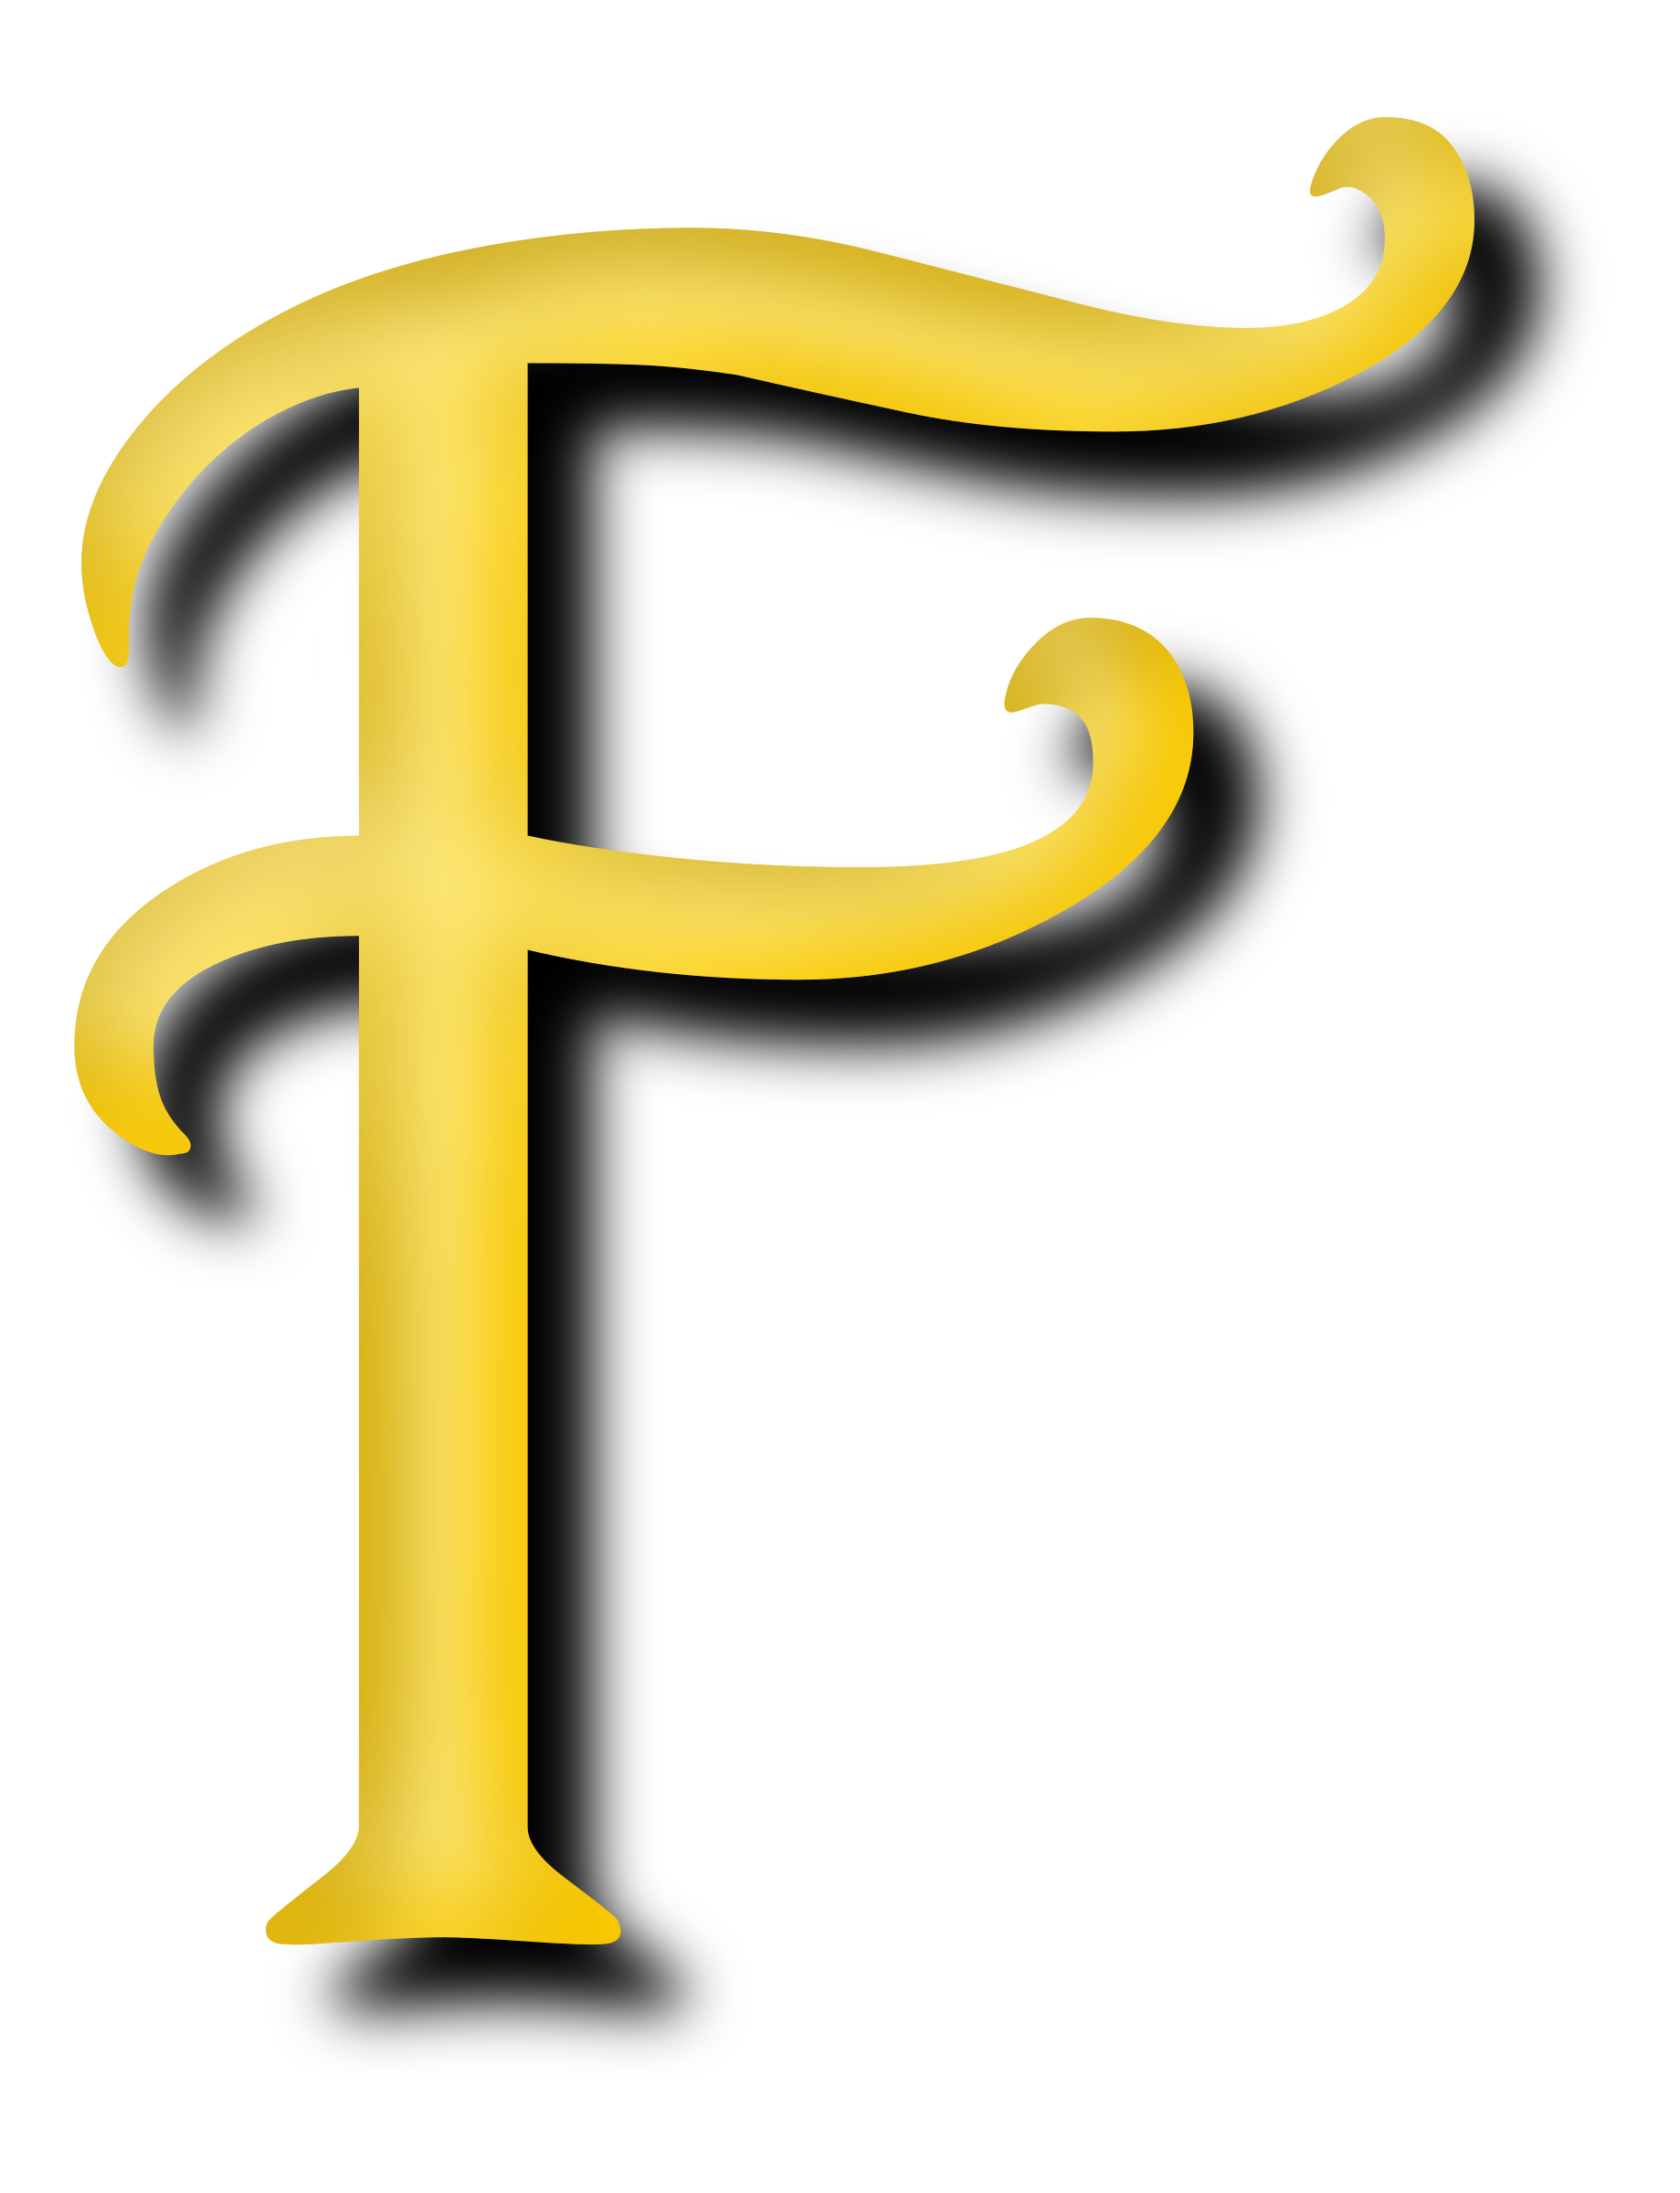  Letter F  vector clipart image Free stock photo Public 